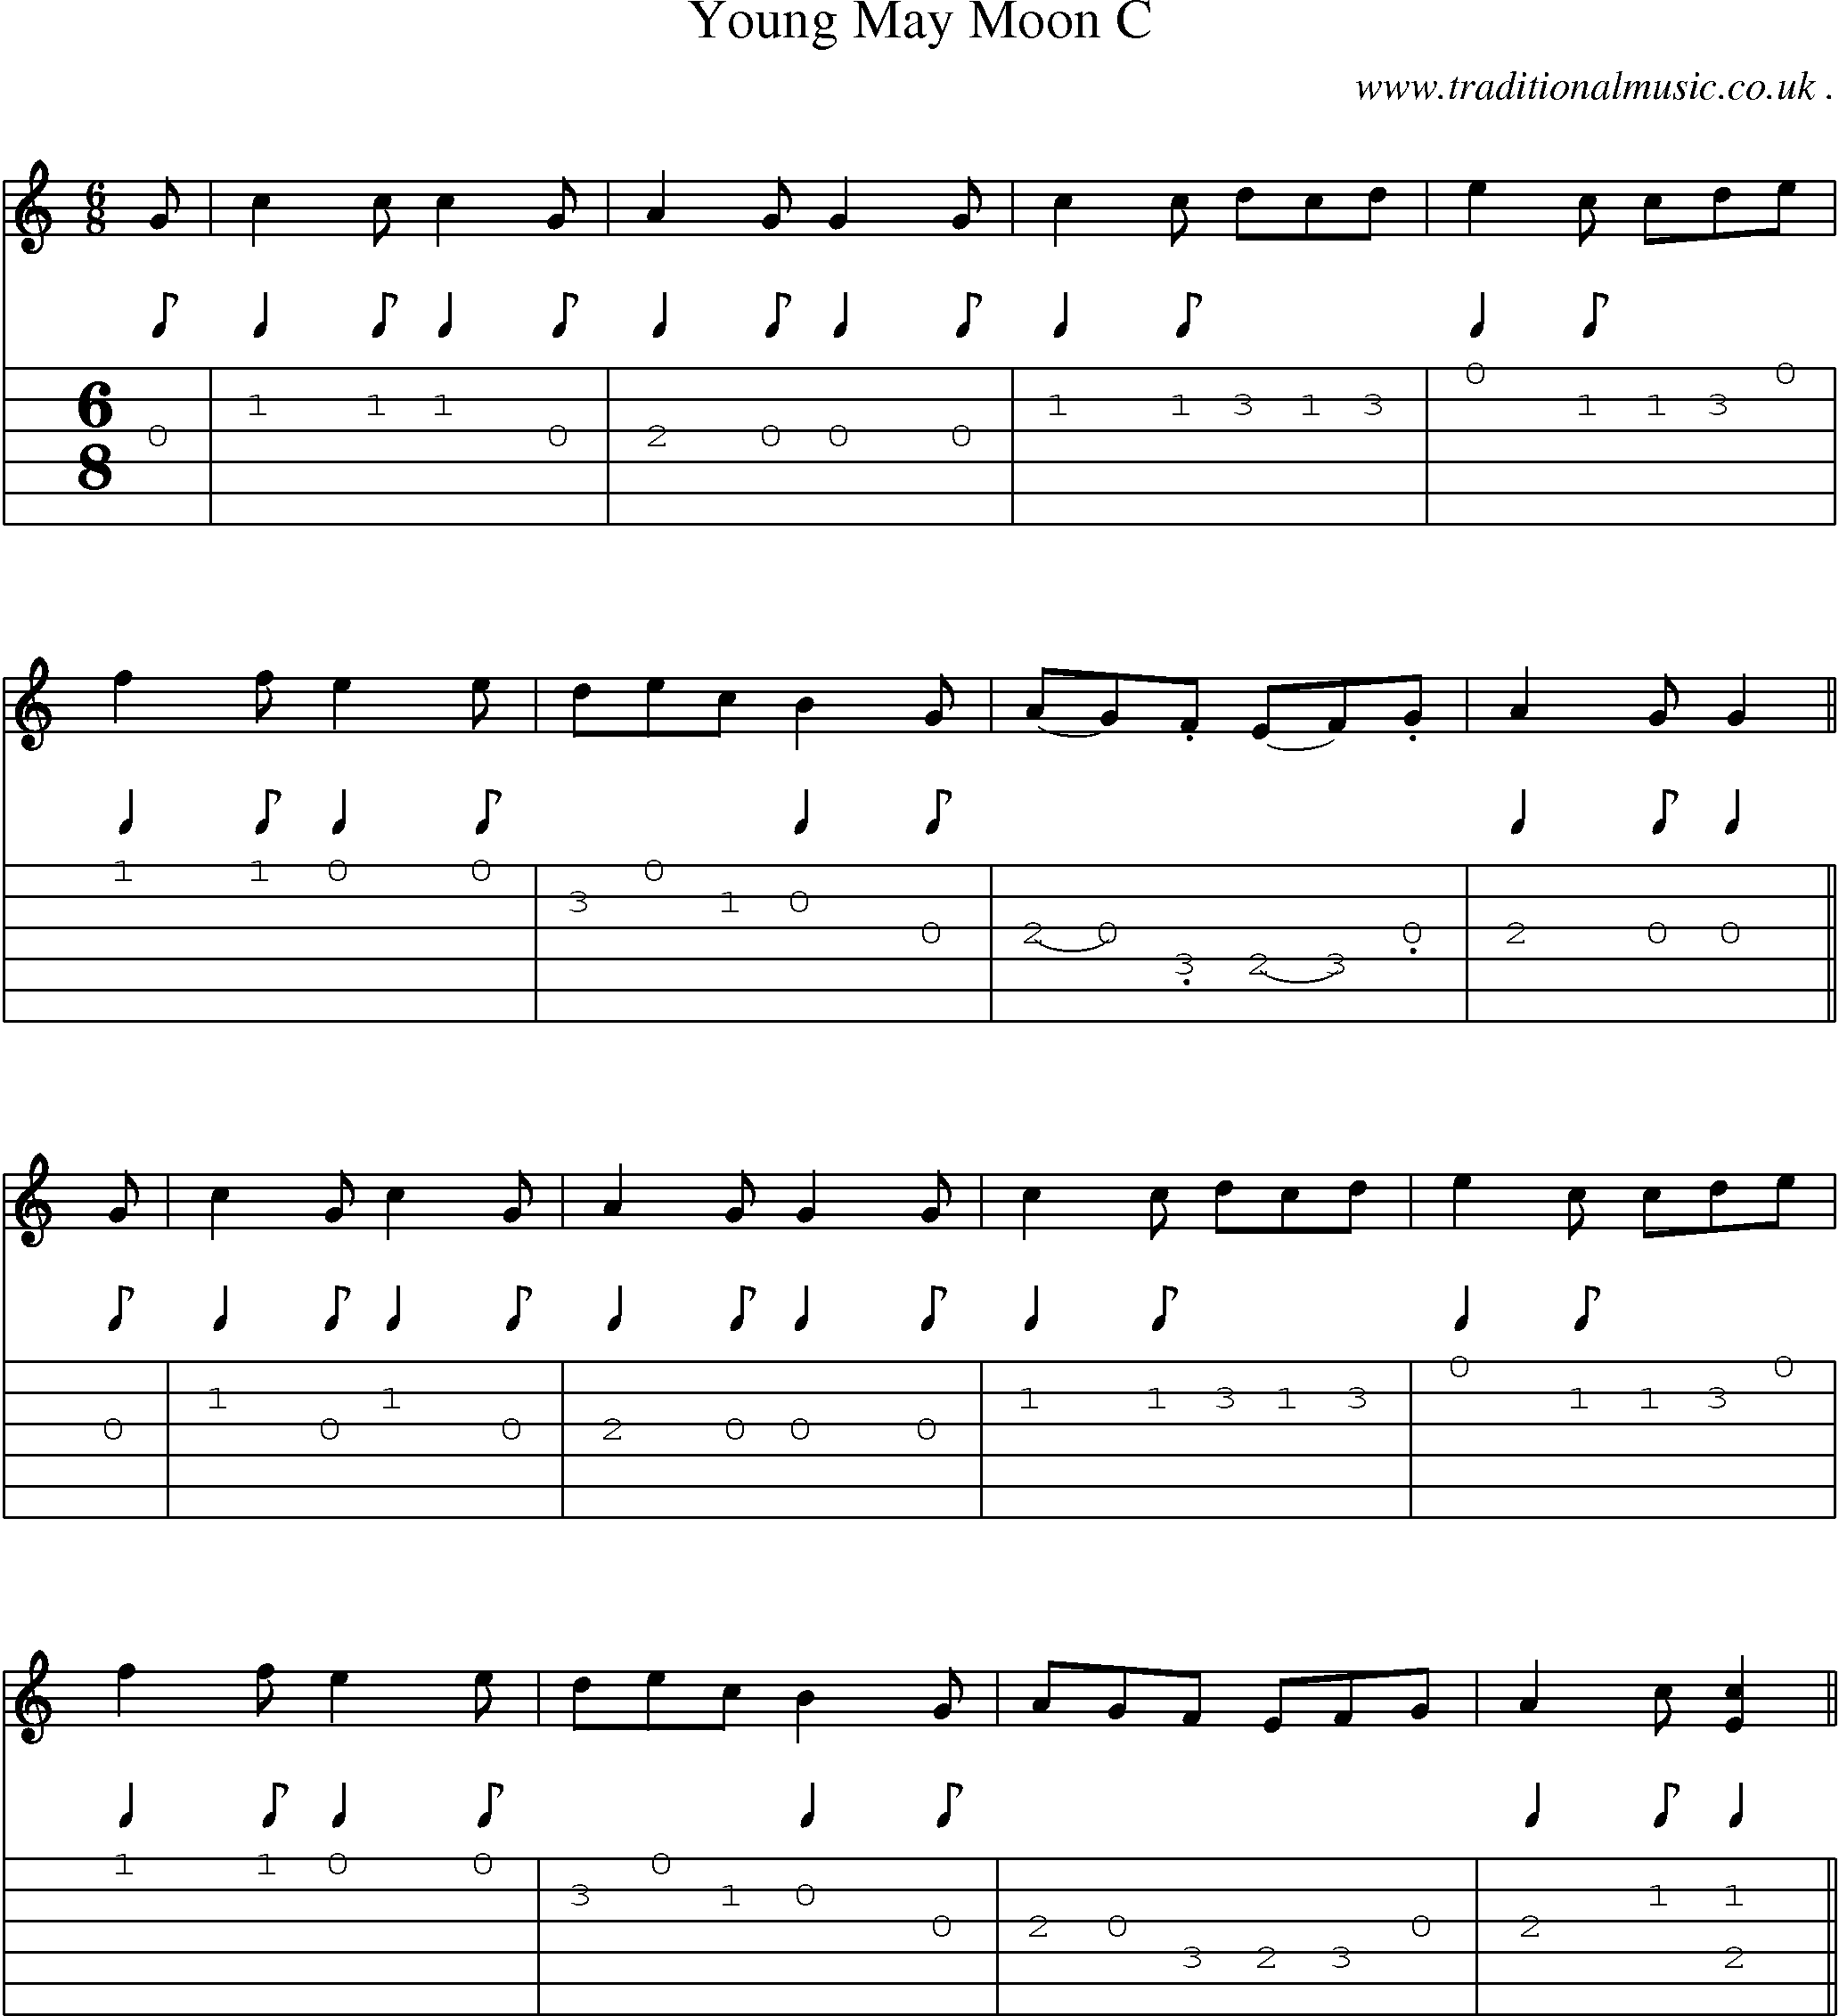 Sheet-Music and Guitar Tabs for Young May Moon C